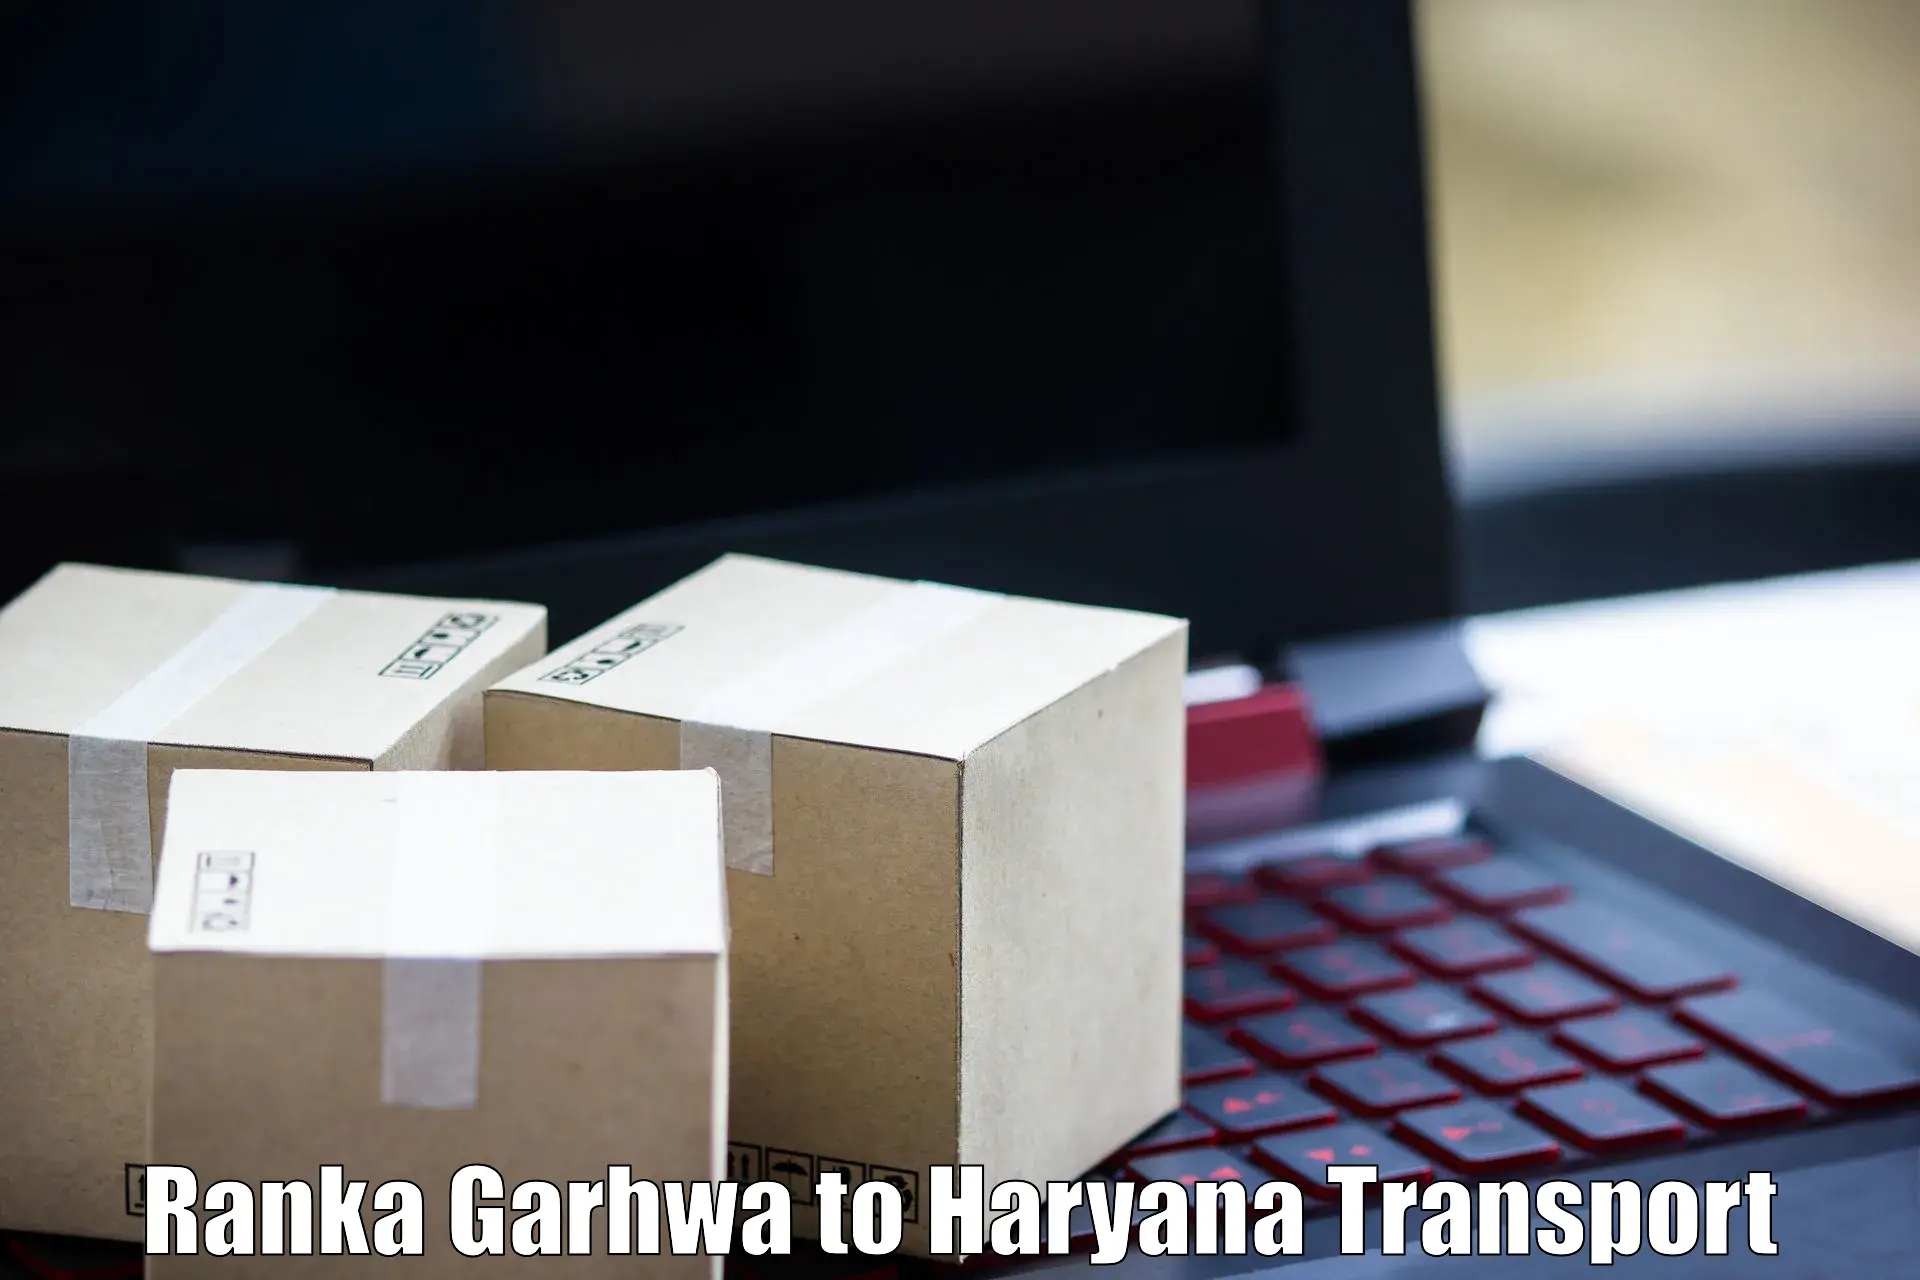 Road transport services in Ranka Garhwa to NCR Haryana